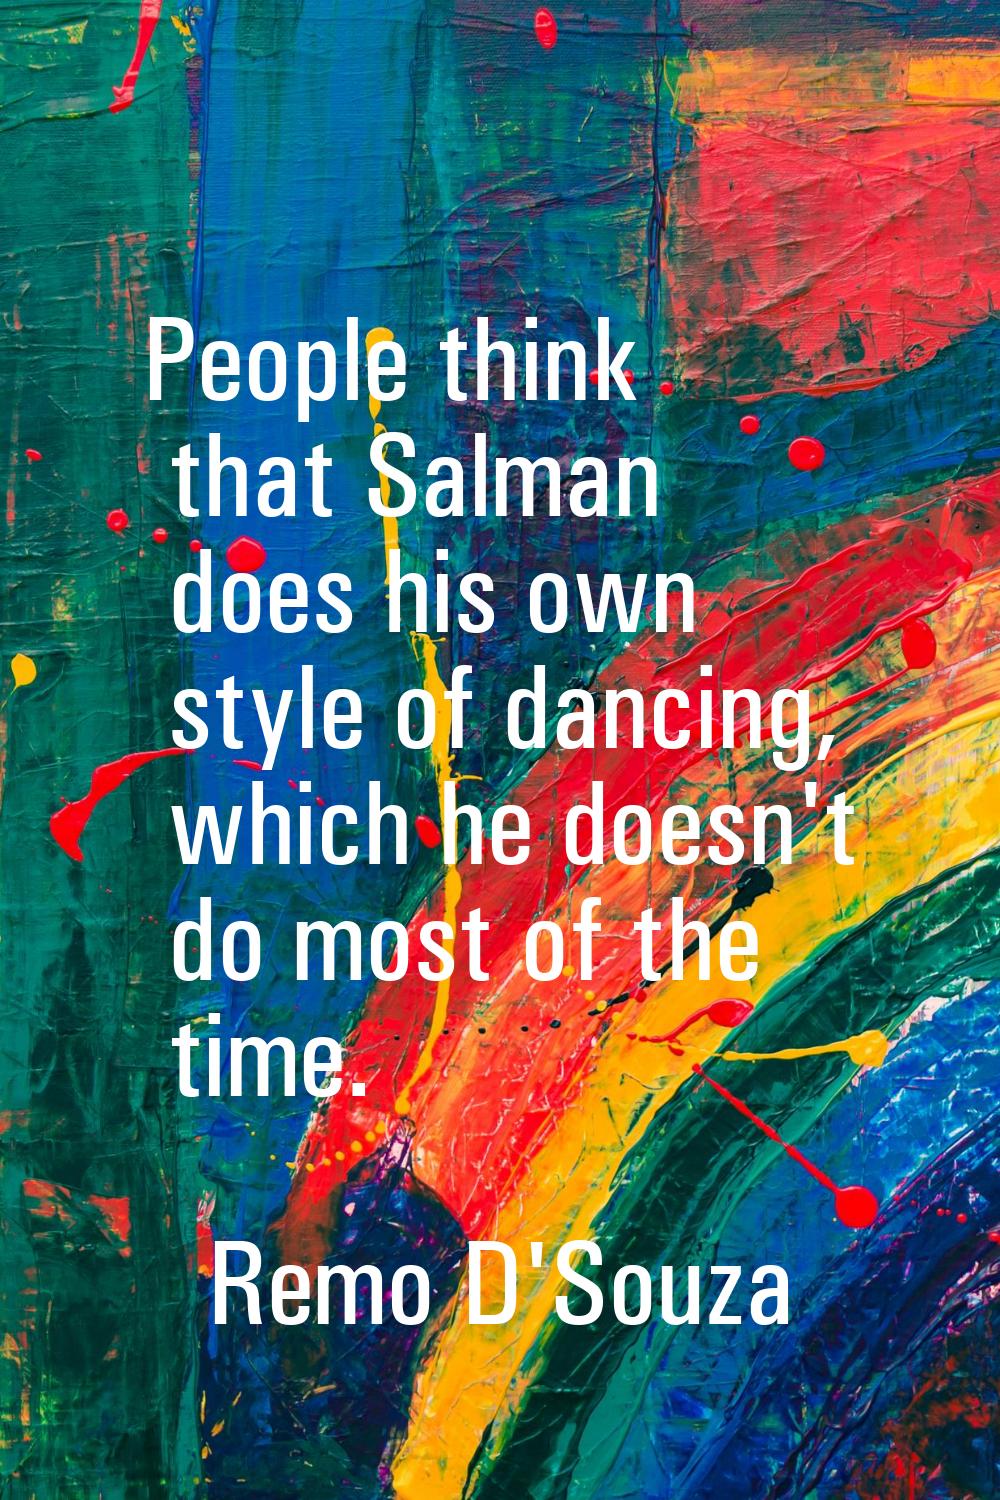 People think that Salman does his own style of dancing, which he doesn't do most of the time.